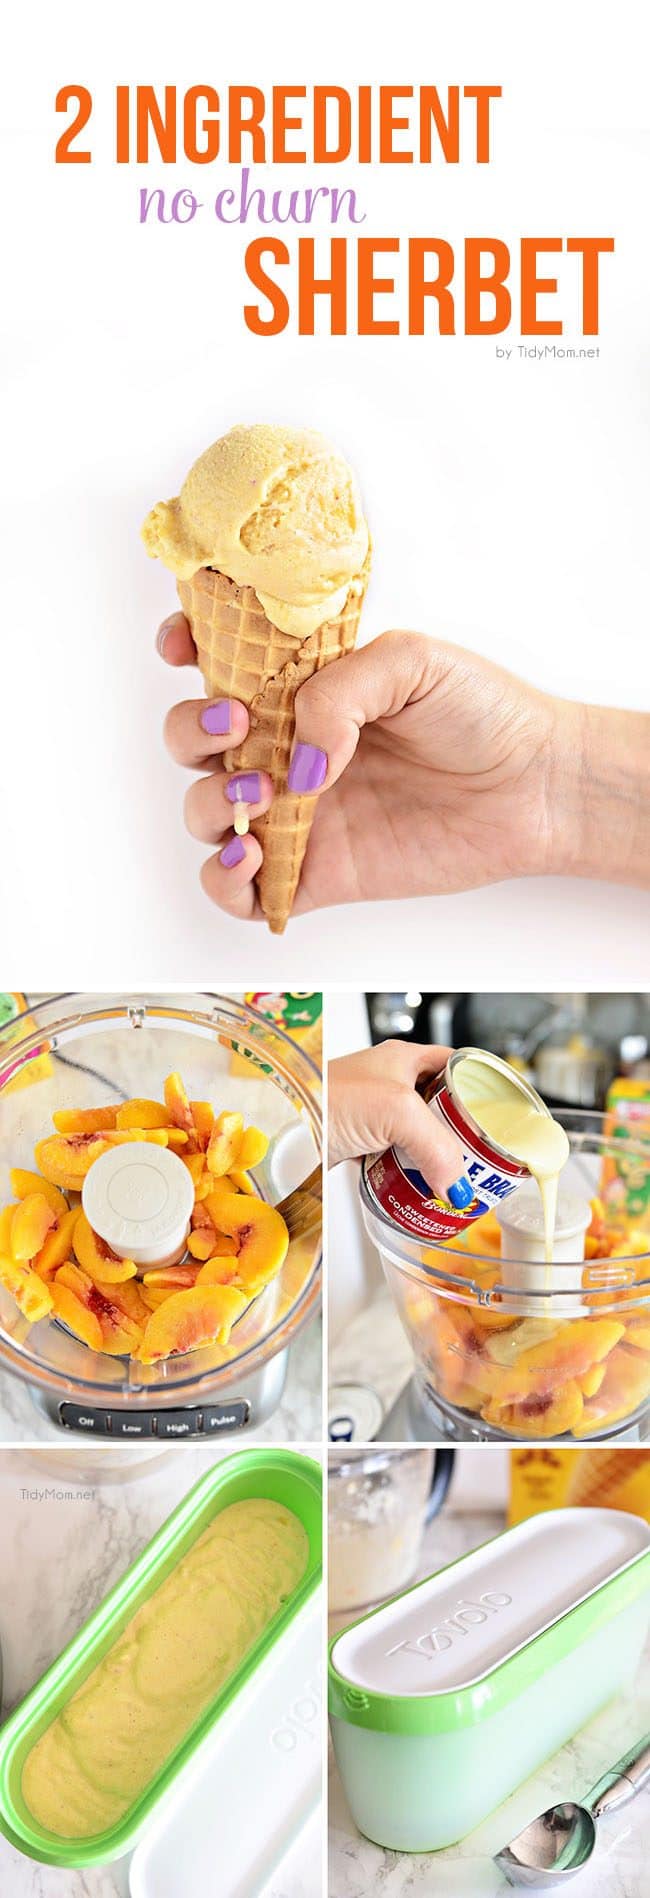 This creamy frozen treat is so easy to make, no churning, no machine and if you like soft serve, it’s ready to eat in 2 minutes!! 2 Ingredient Peach Sherbet recipe at TidyMom.net —— make other varieties by using your favorite fruits!